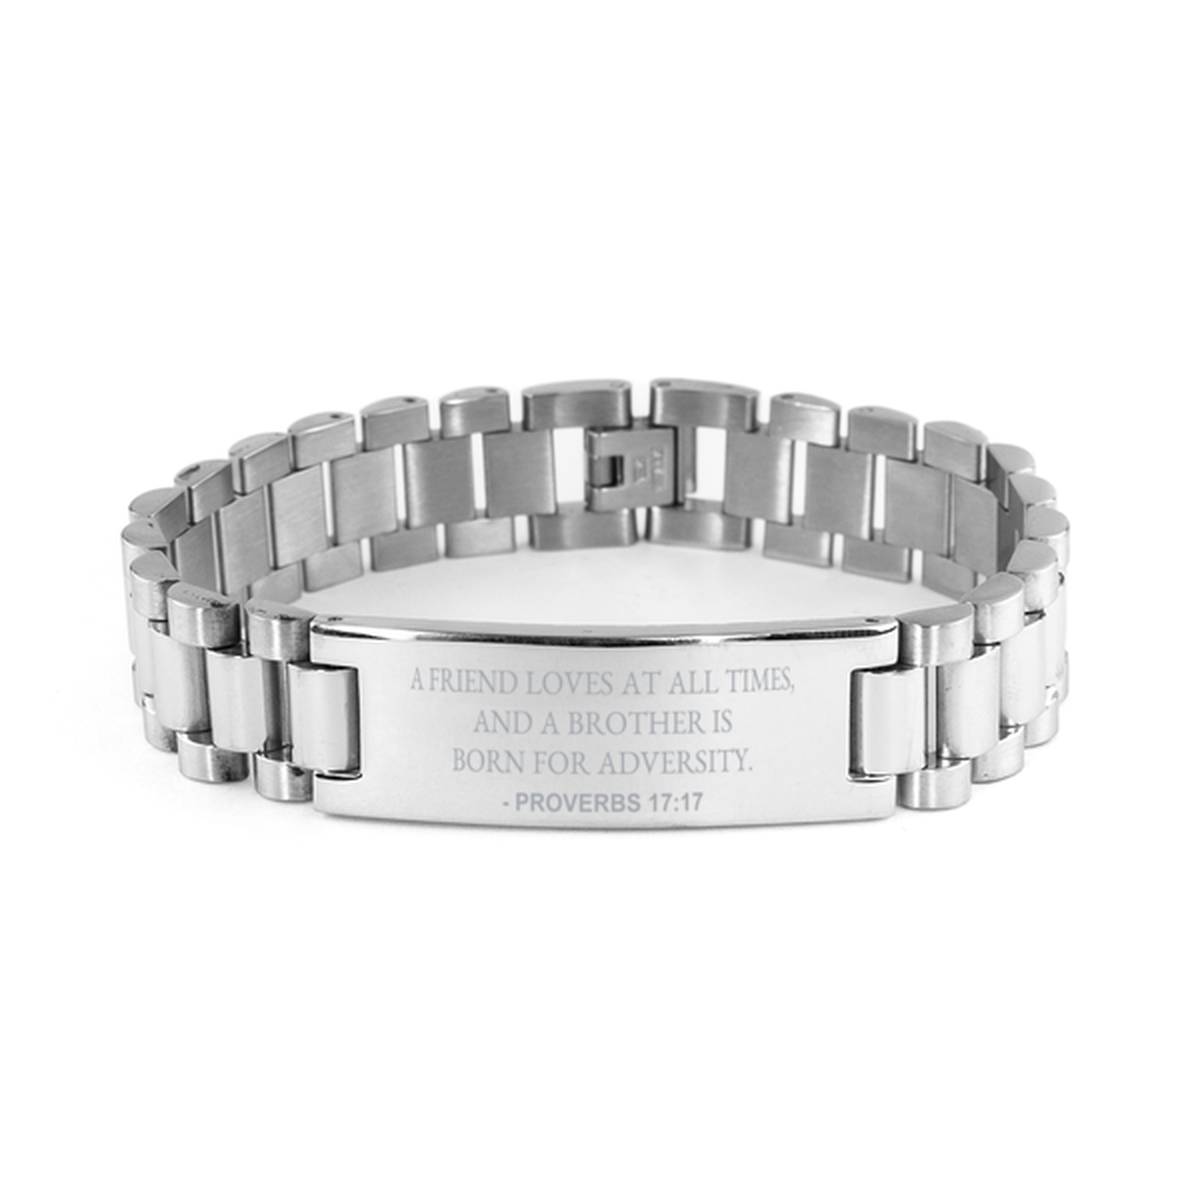 Christian Ladder Stainless Steel Bracelet, Proverbs 17:17 A Friend Loves At All Times, And A Brother Is, Motivational Bible Verse Gifts For Men Women